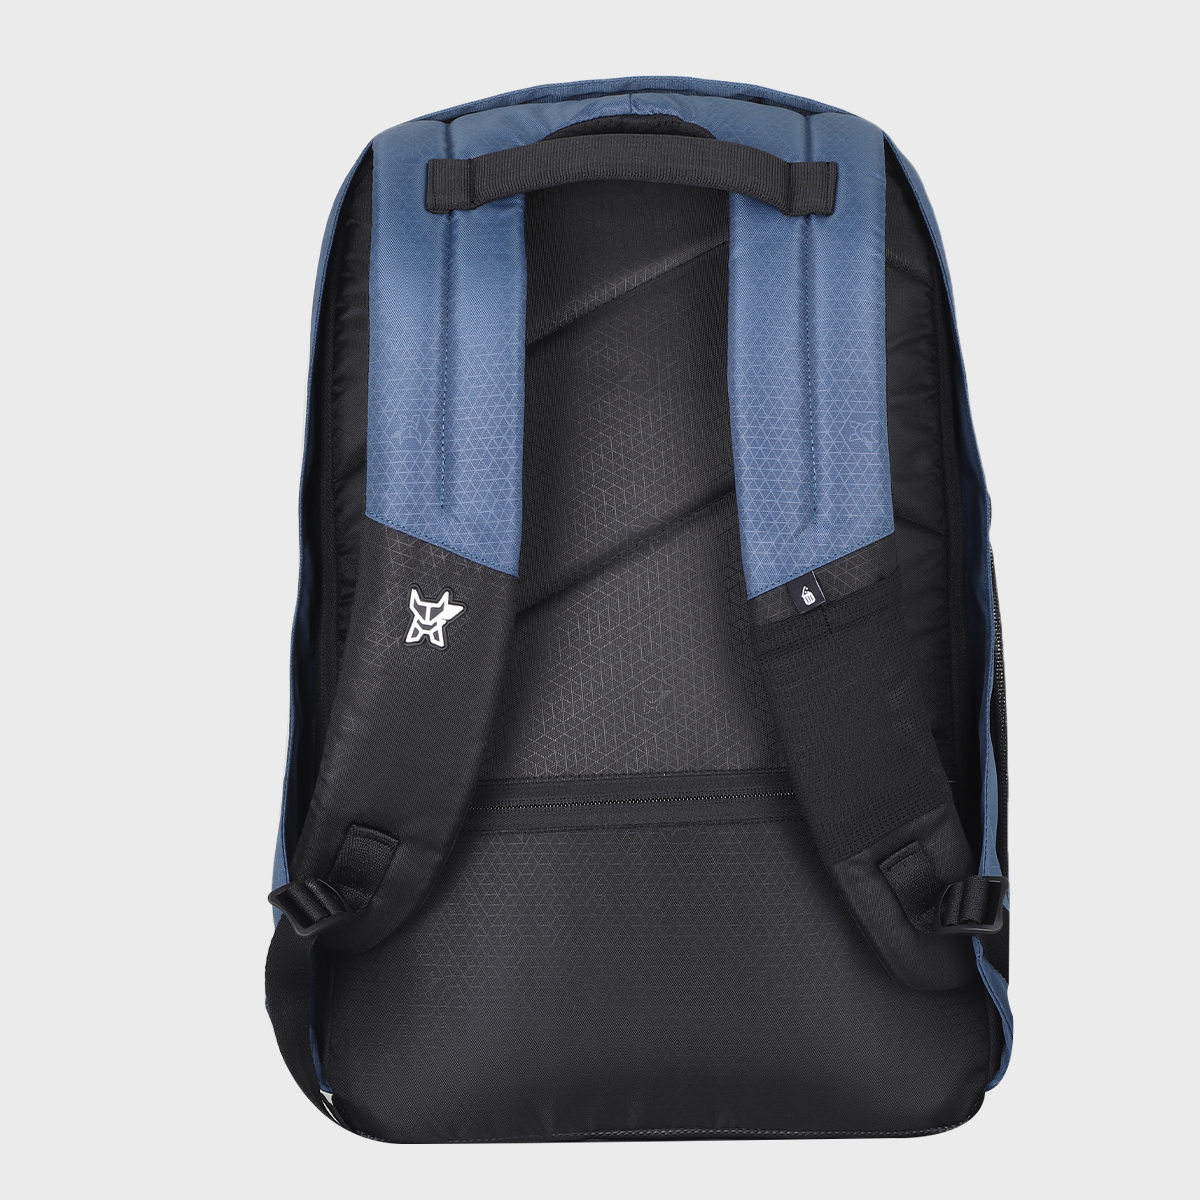 This Laptop Backpack has Special Features Carryminati wala Bag   YouTube